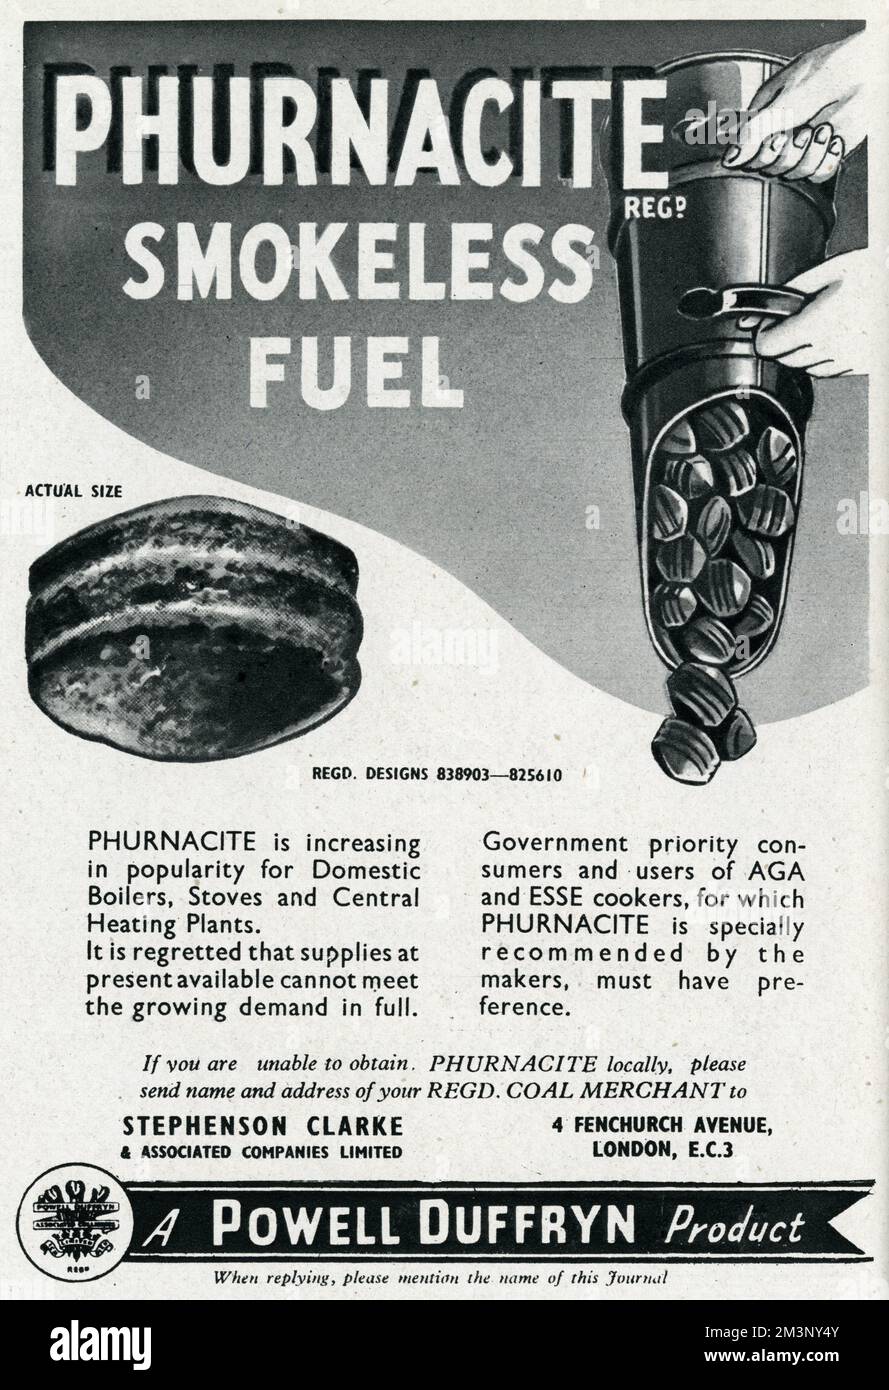 'Phurnacite smokeless fuel'.  Phurnacite is increasing in popularity for Domestic Boilers, stoves and central heating Plants.  It is regretted that supplies at present available cannot meet the growing demand in full.  government priority consumers and users of AGA and ESSE cookers, for which Phurnacite is specially recommended by the makers, must have preference.  1944 Stock Photo